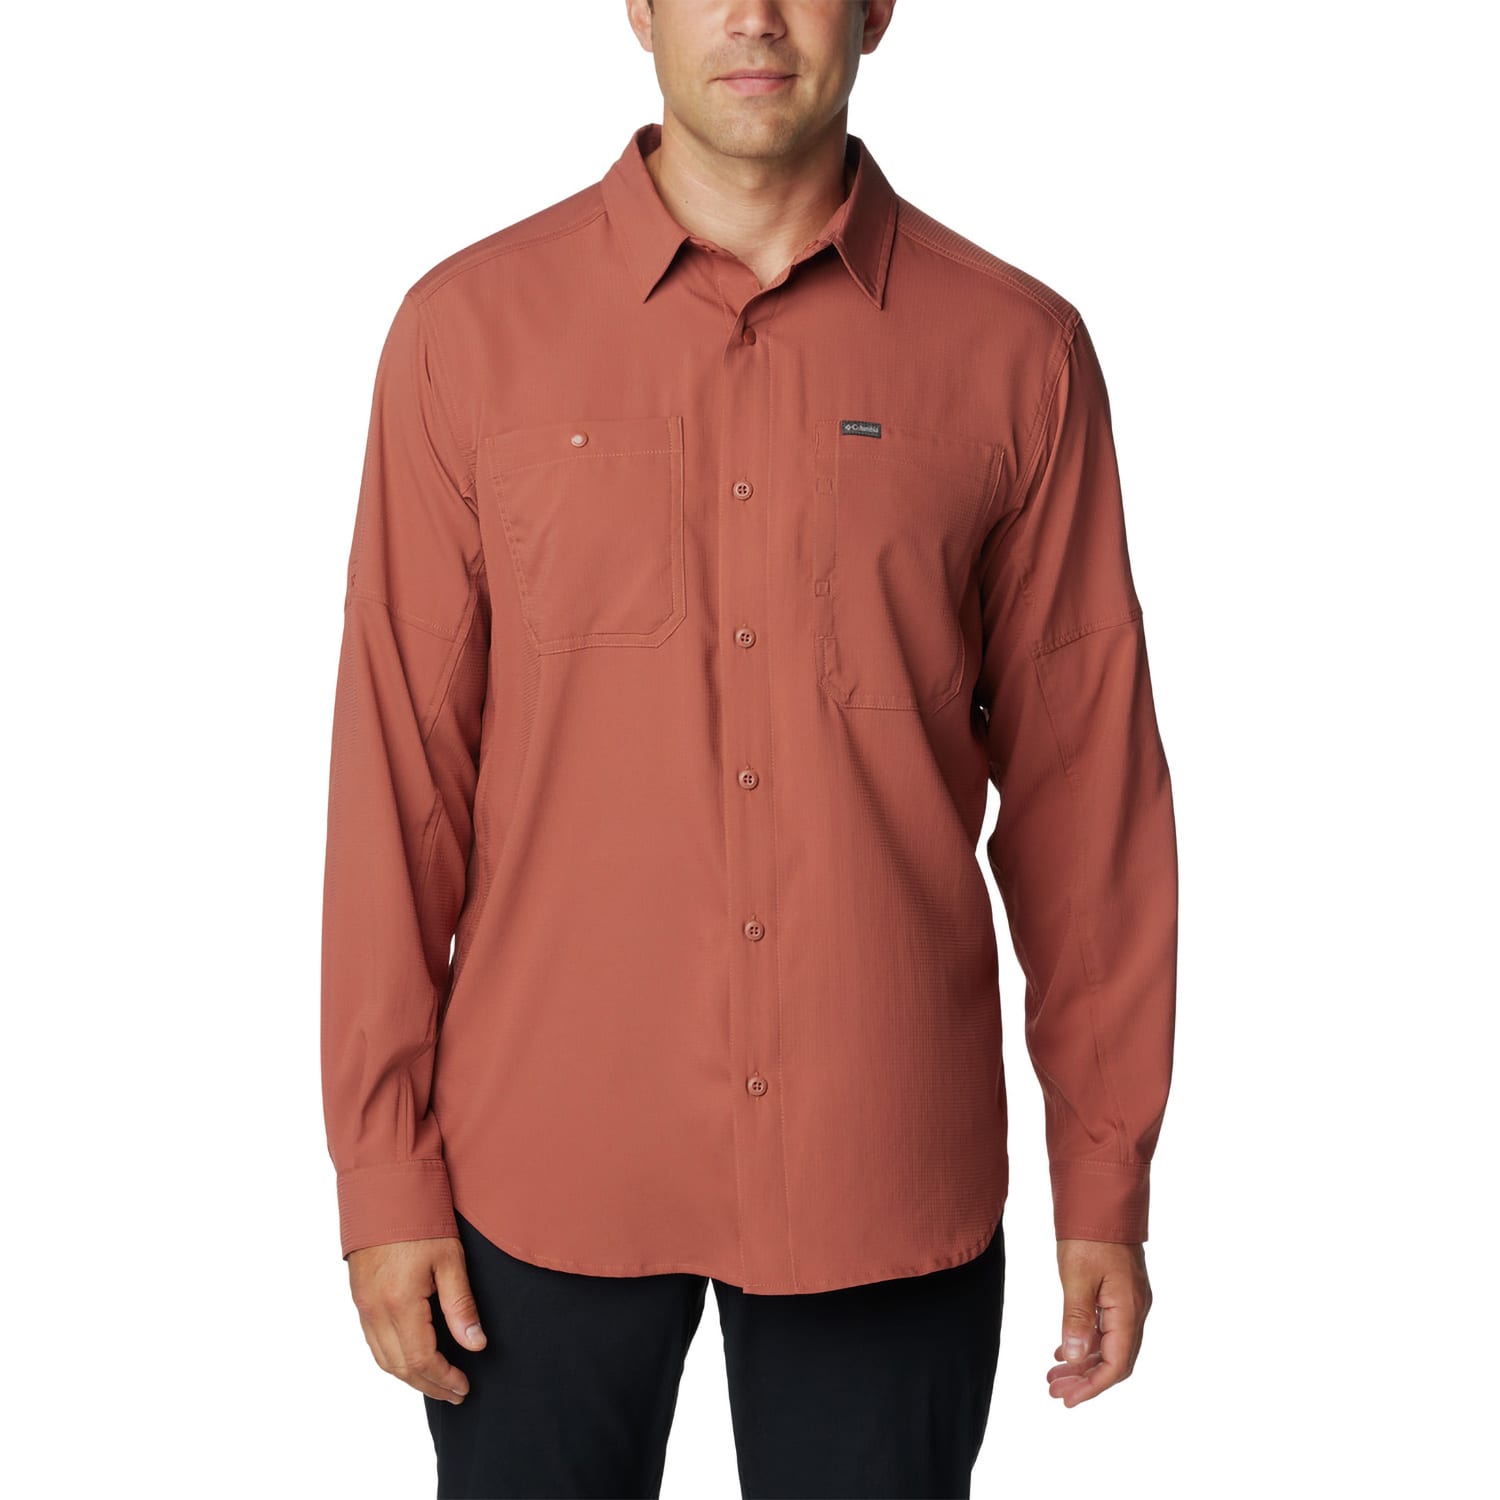 Cabelas Men's Vented Fishing Shirt Long Sleeve Button Up Size